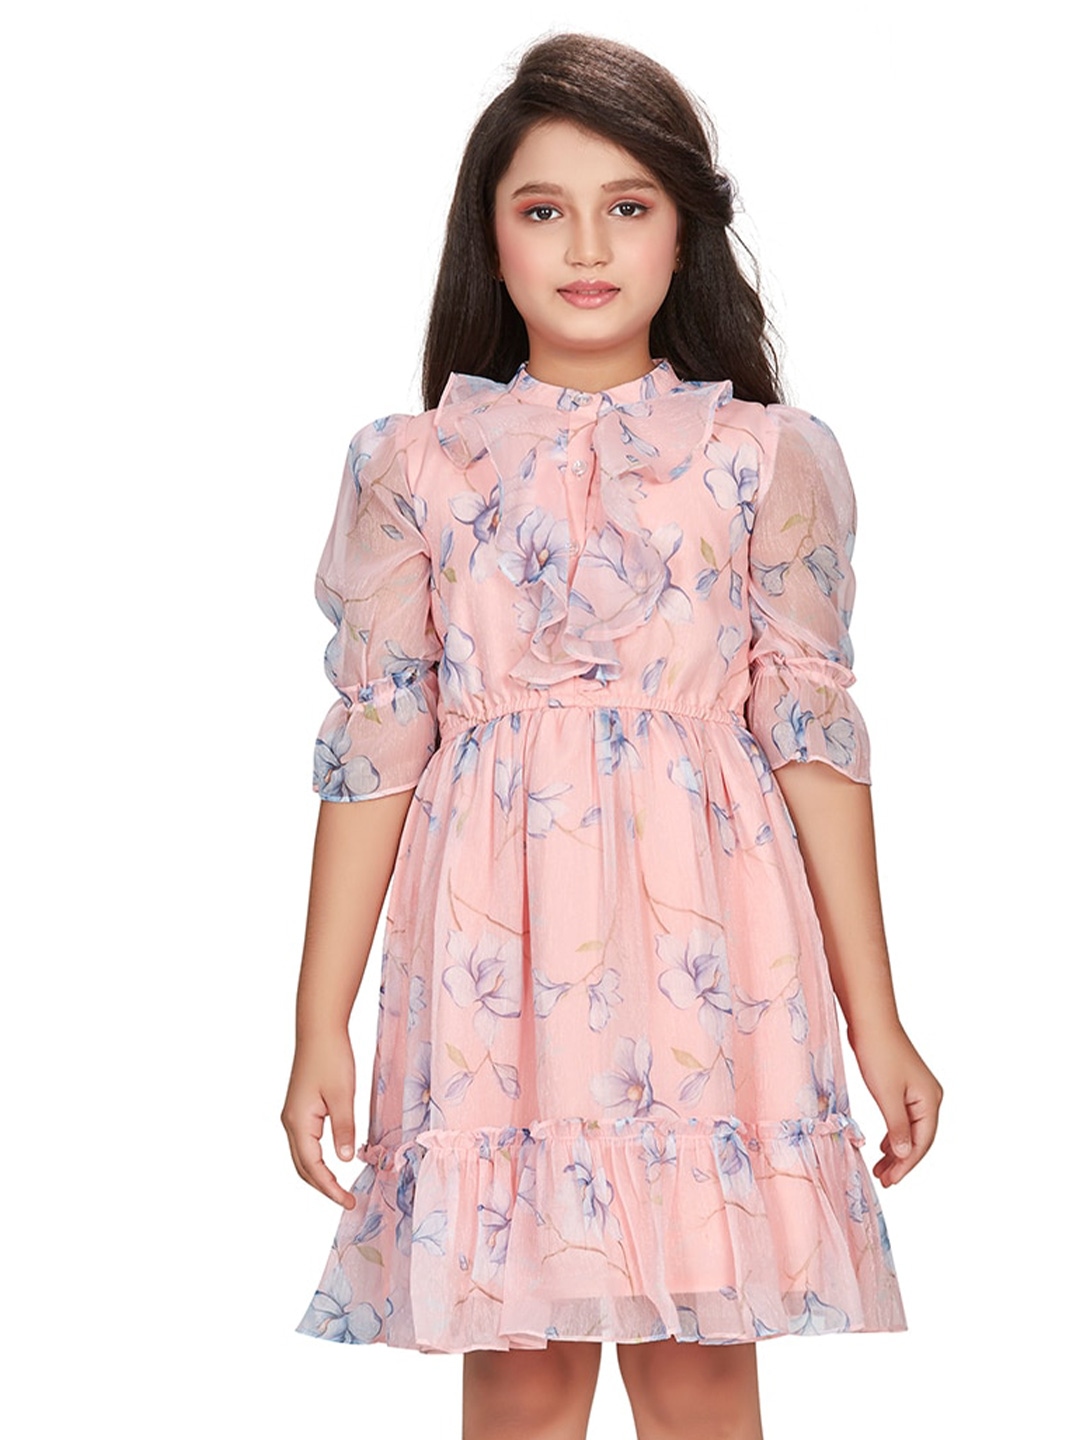 

Peppermint Girls Floral Printed Satin Fit & Flare Dress, Peach